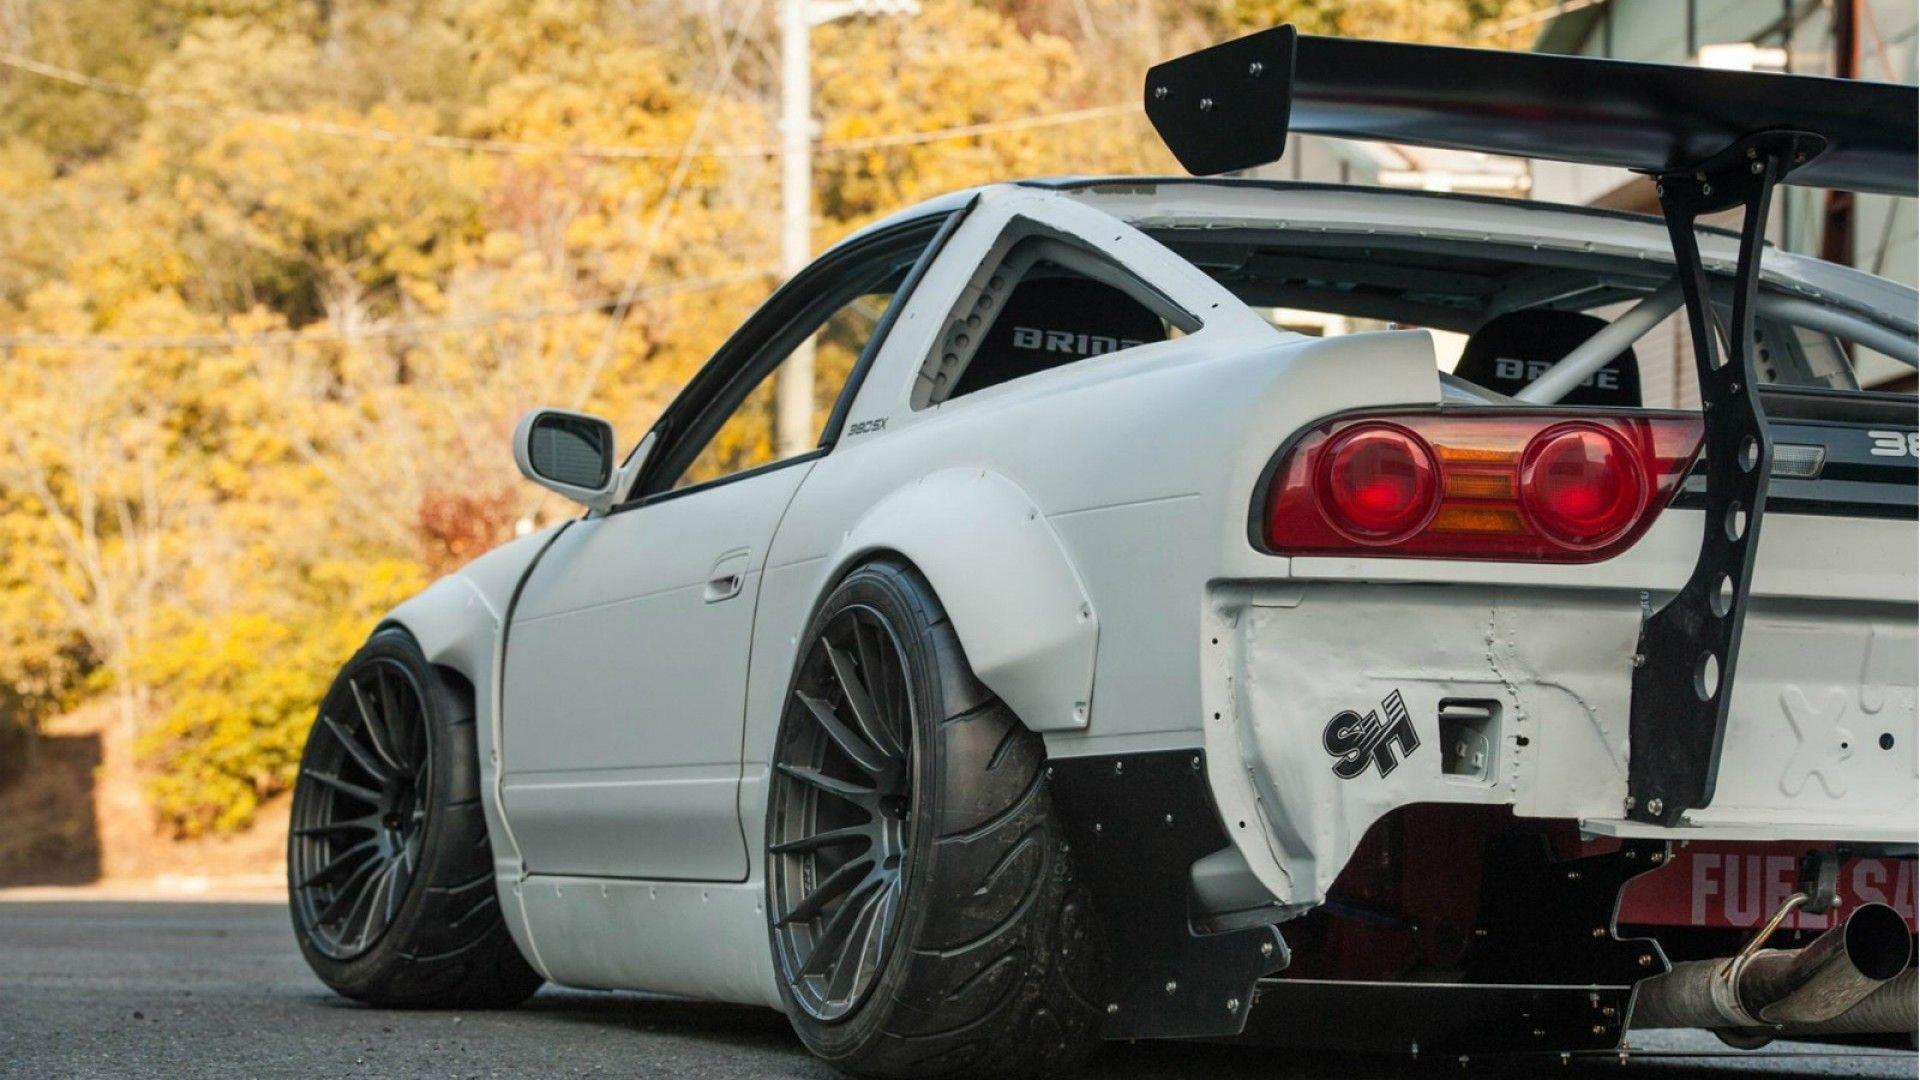 Jdm Hd Wallpaper For Android